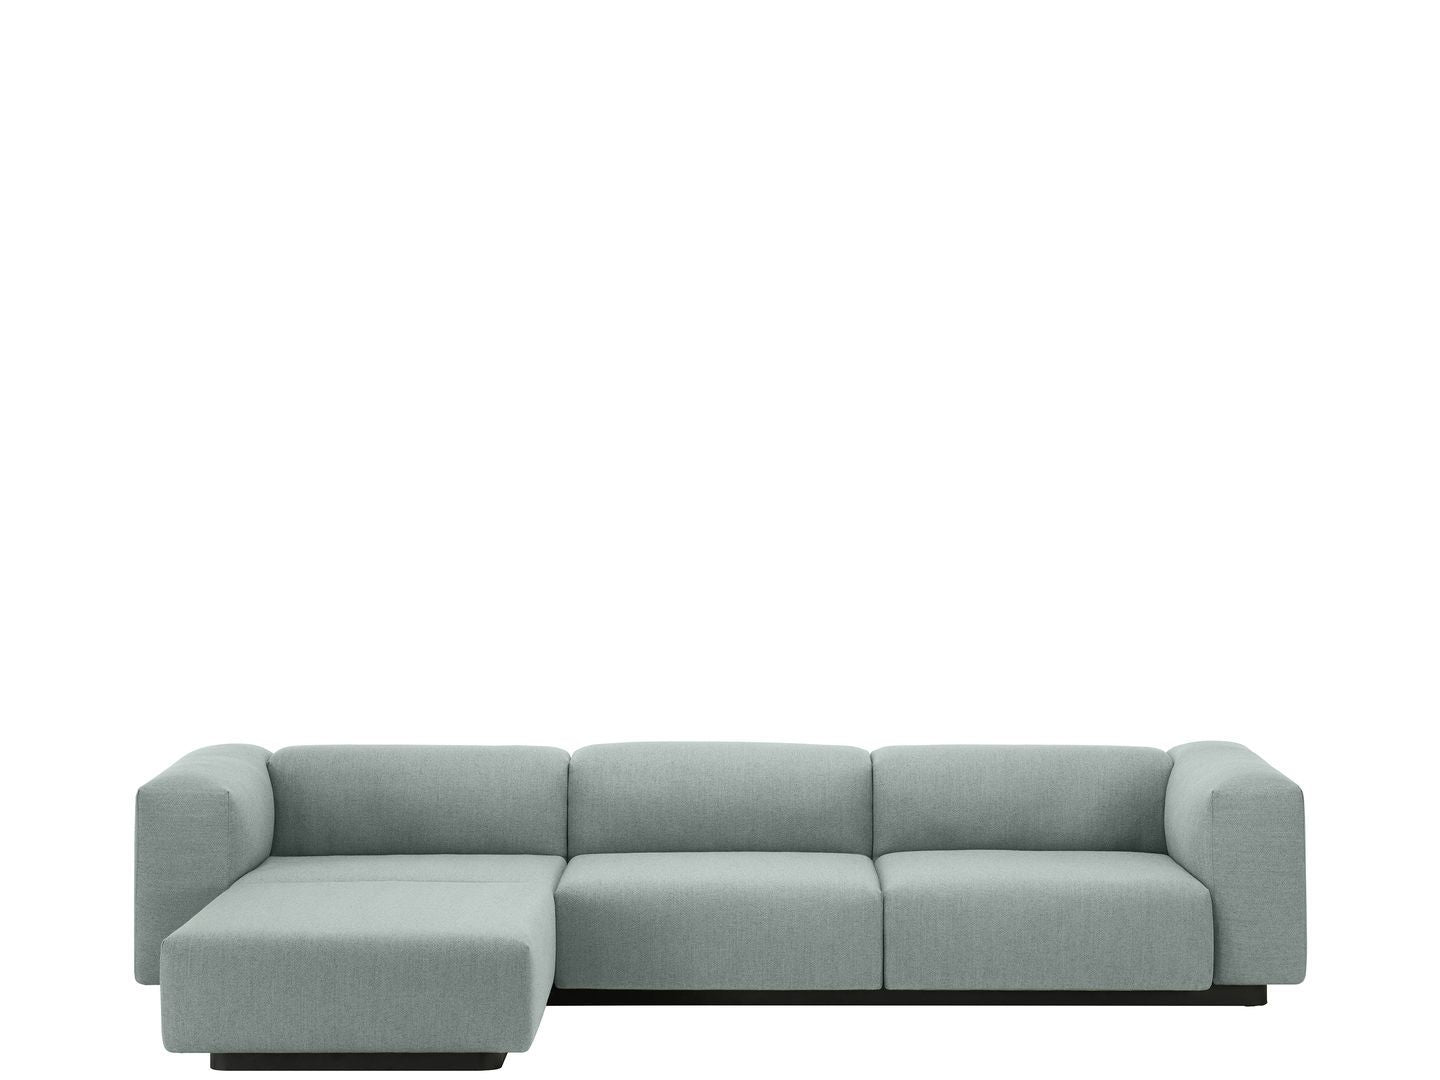 Vitra Soft Modular Sofa Three-seater, Chaise Longue from One52 Furniture